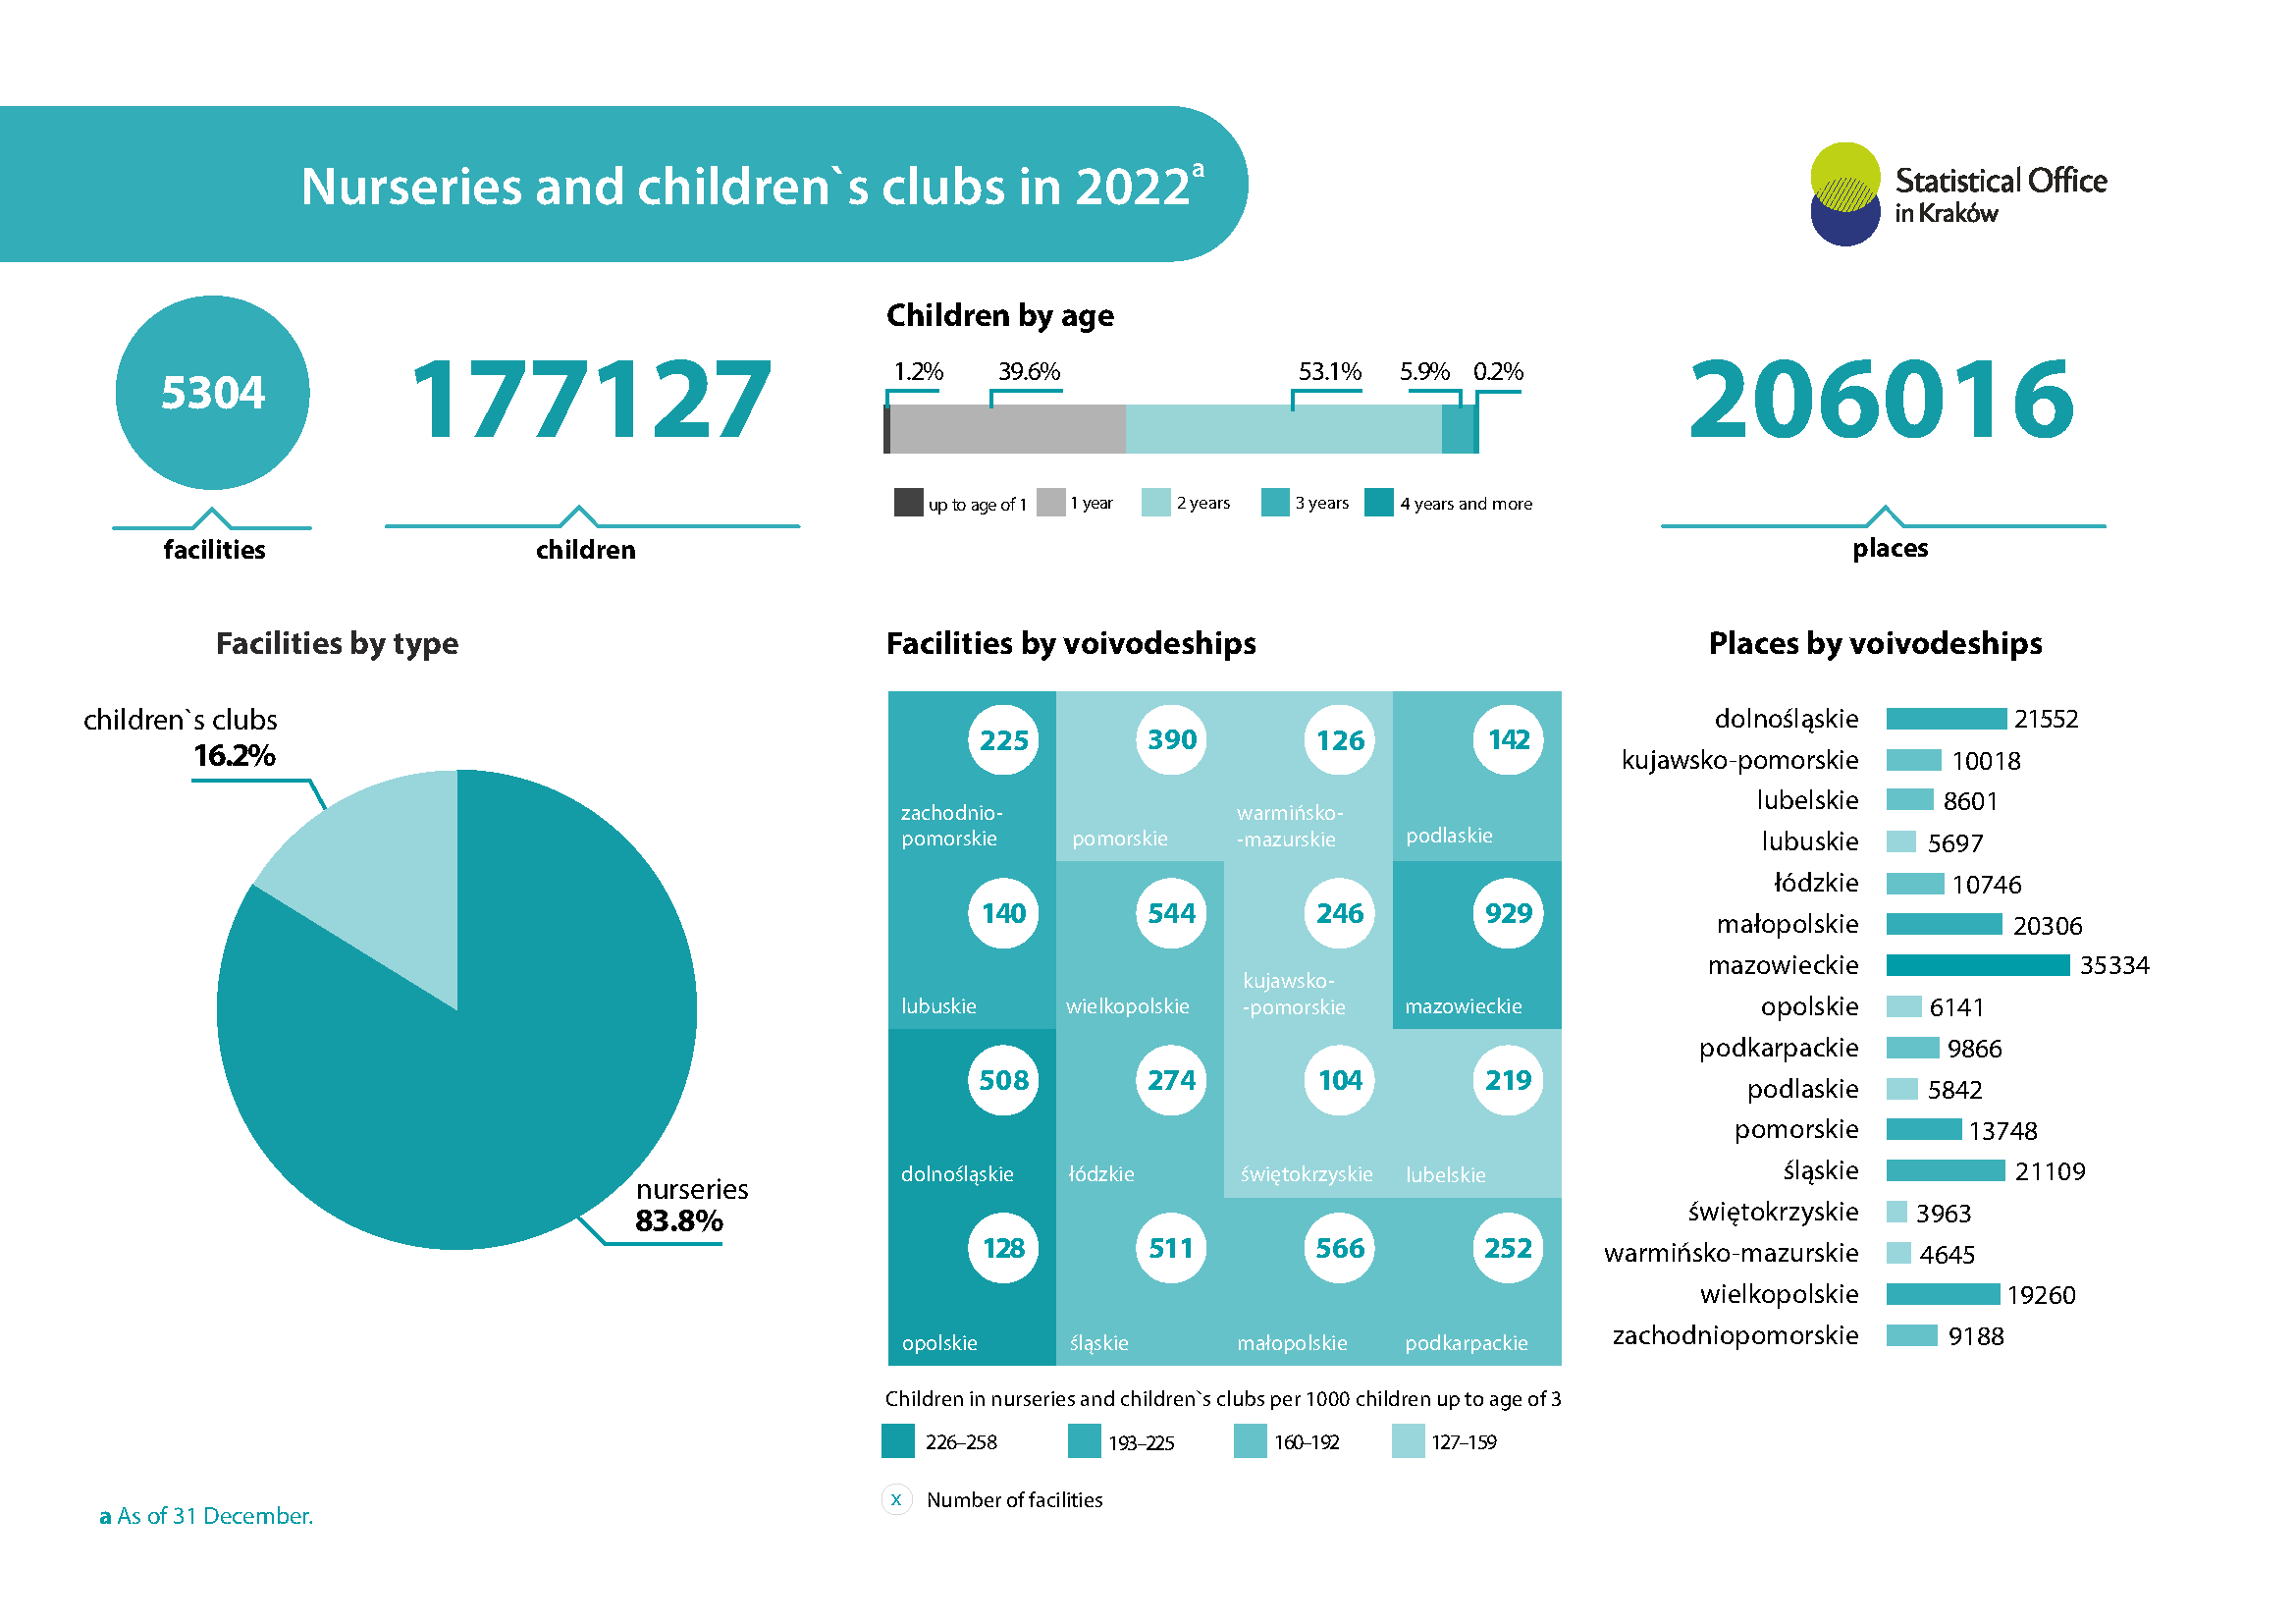 Nurseries and children's clubs in 2022 